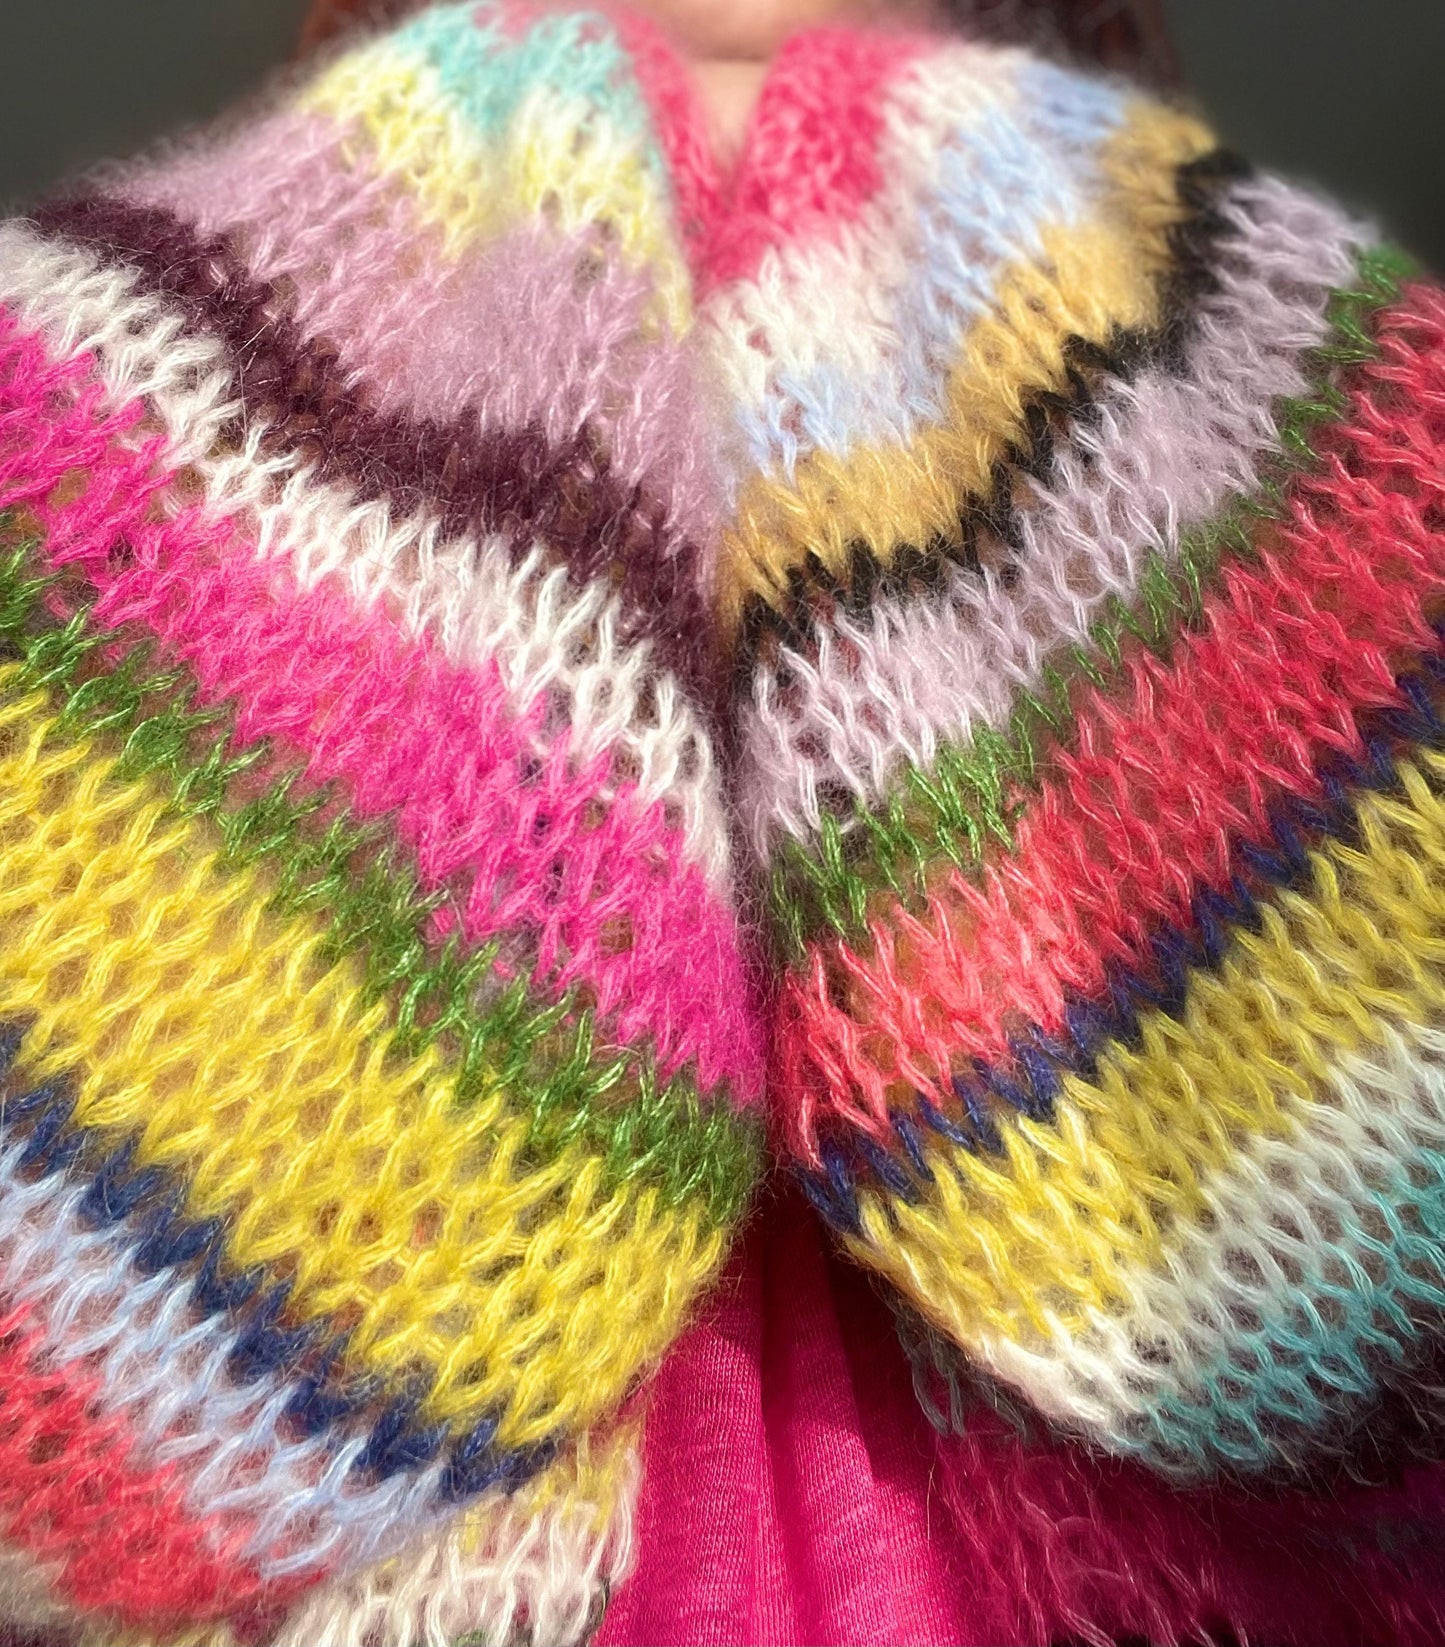 APRIL Silk Mohair Cardigan with Balloon Sleeves, Relaxed Fit, Hand Knit, Multicolor Jumper, Colourful Stripes, Striped Multicolor Cardigan